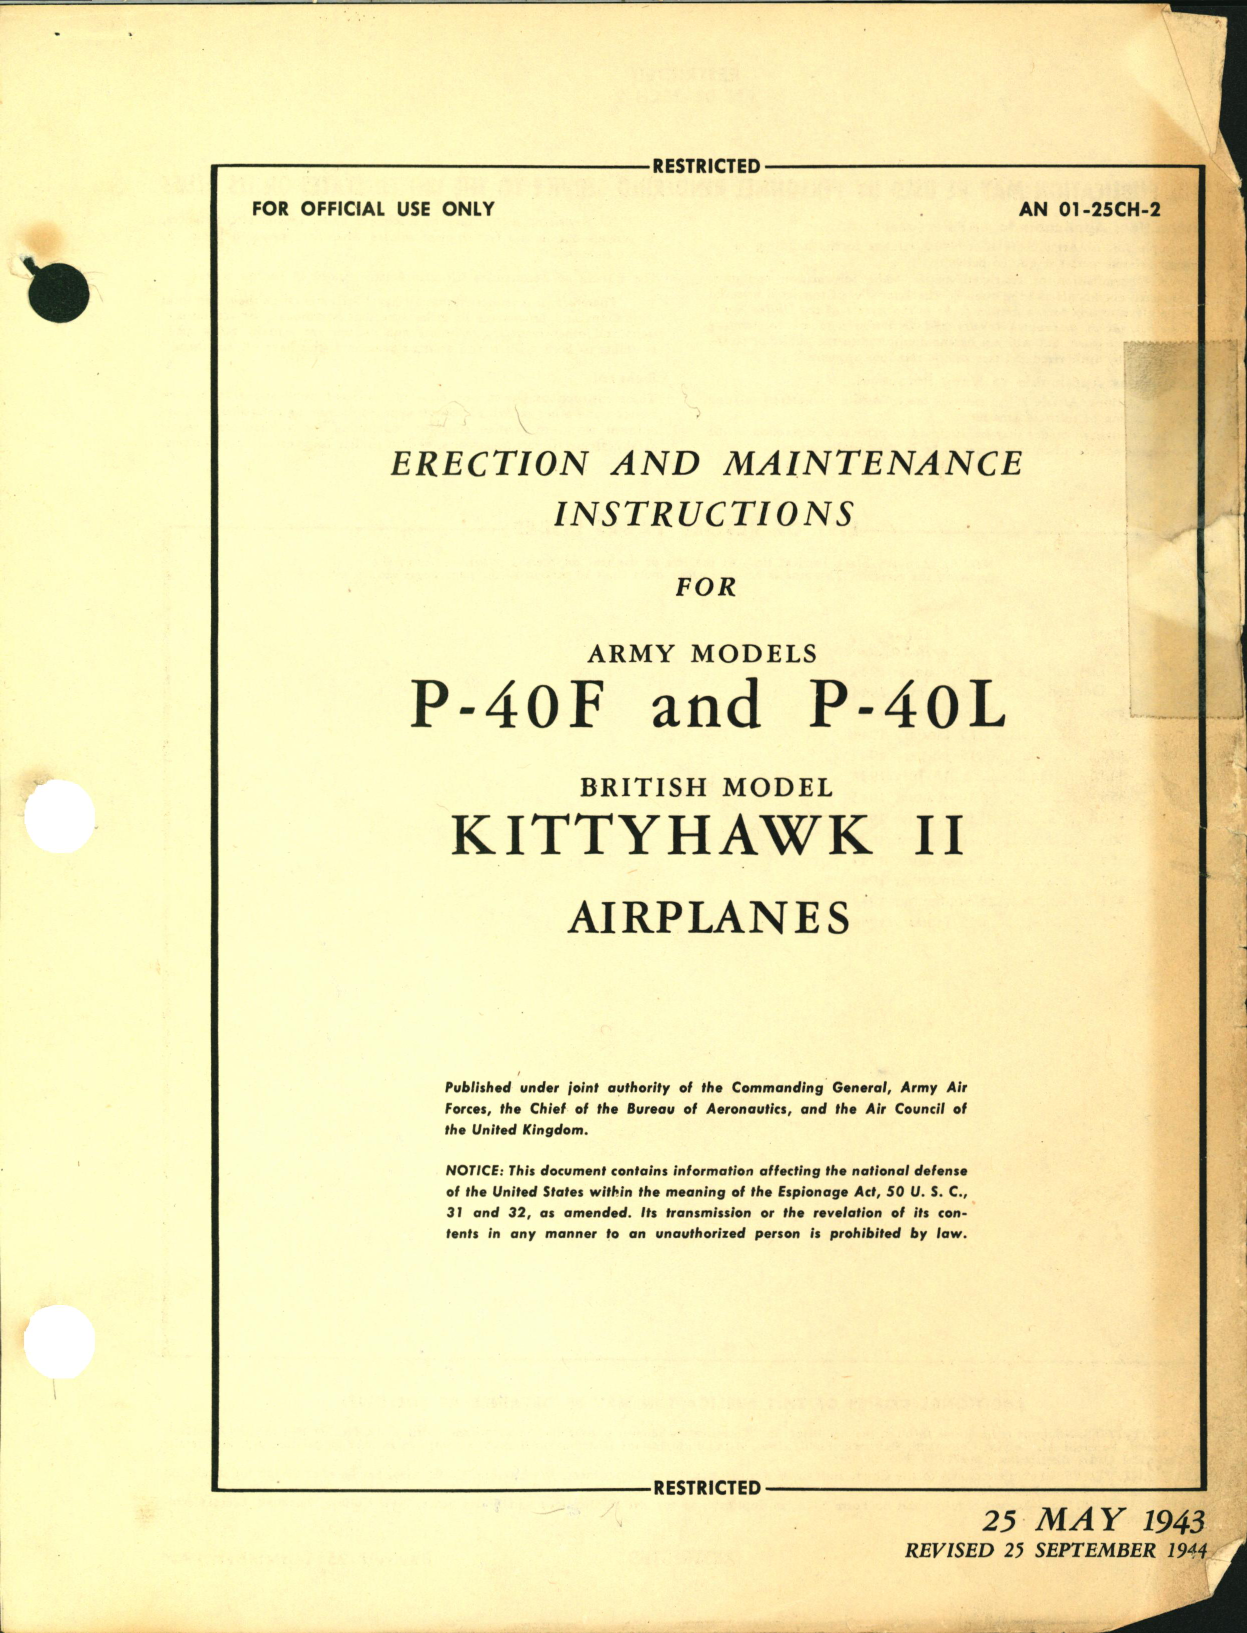 Sample page 1 from AirCorps Library document: Erection & Maintenance Instructions for P-40F and P-40L, Kittyhawk II